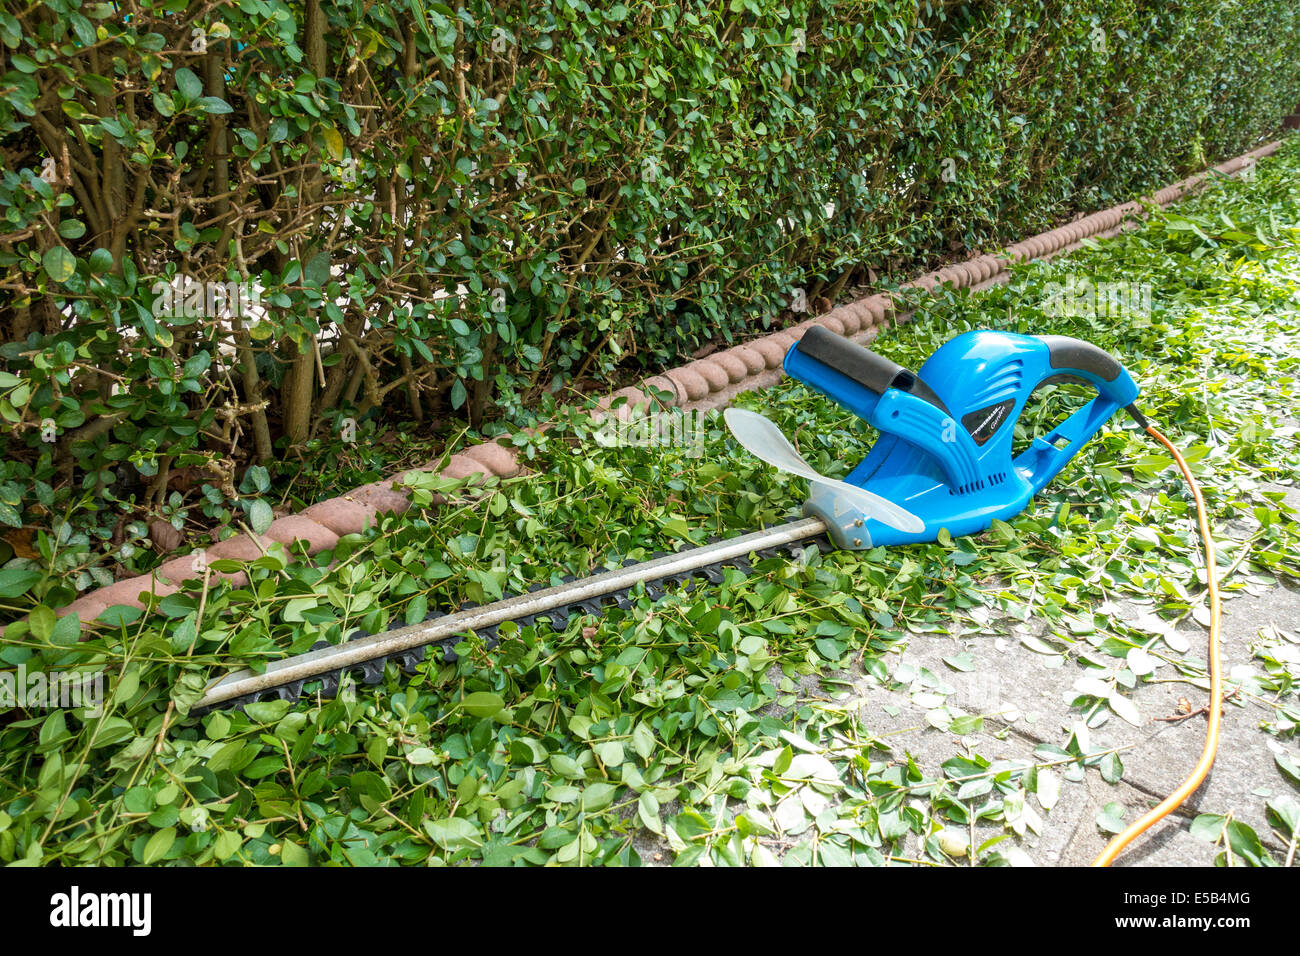 Hedge trimmings below a newly trimmed privet hedge in an urban front garden with electric hedge trimmer Stock Photo